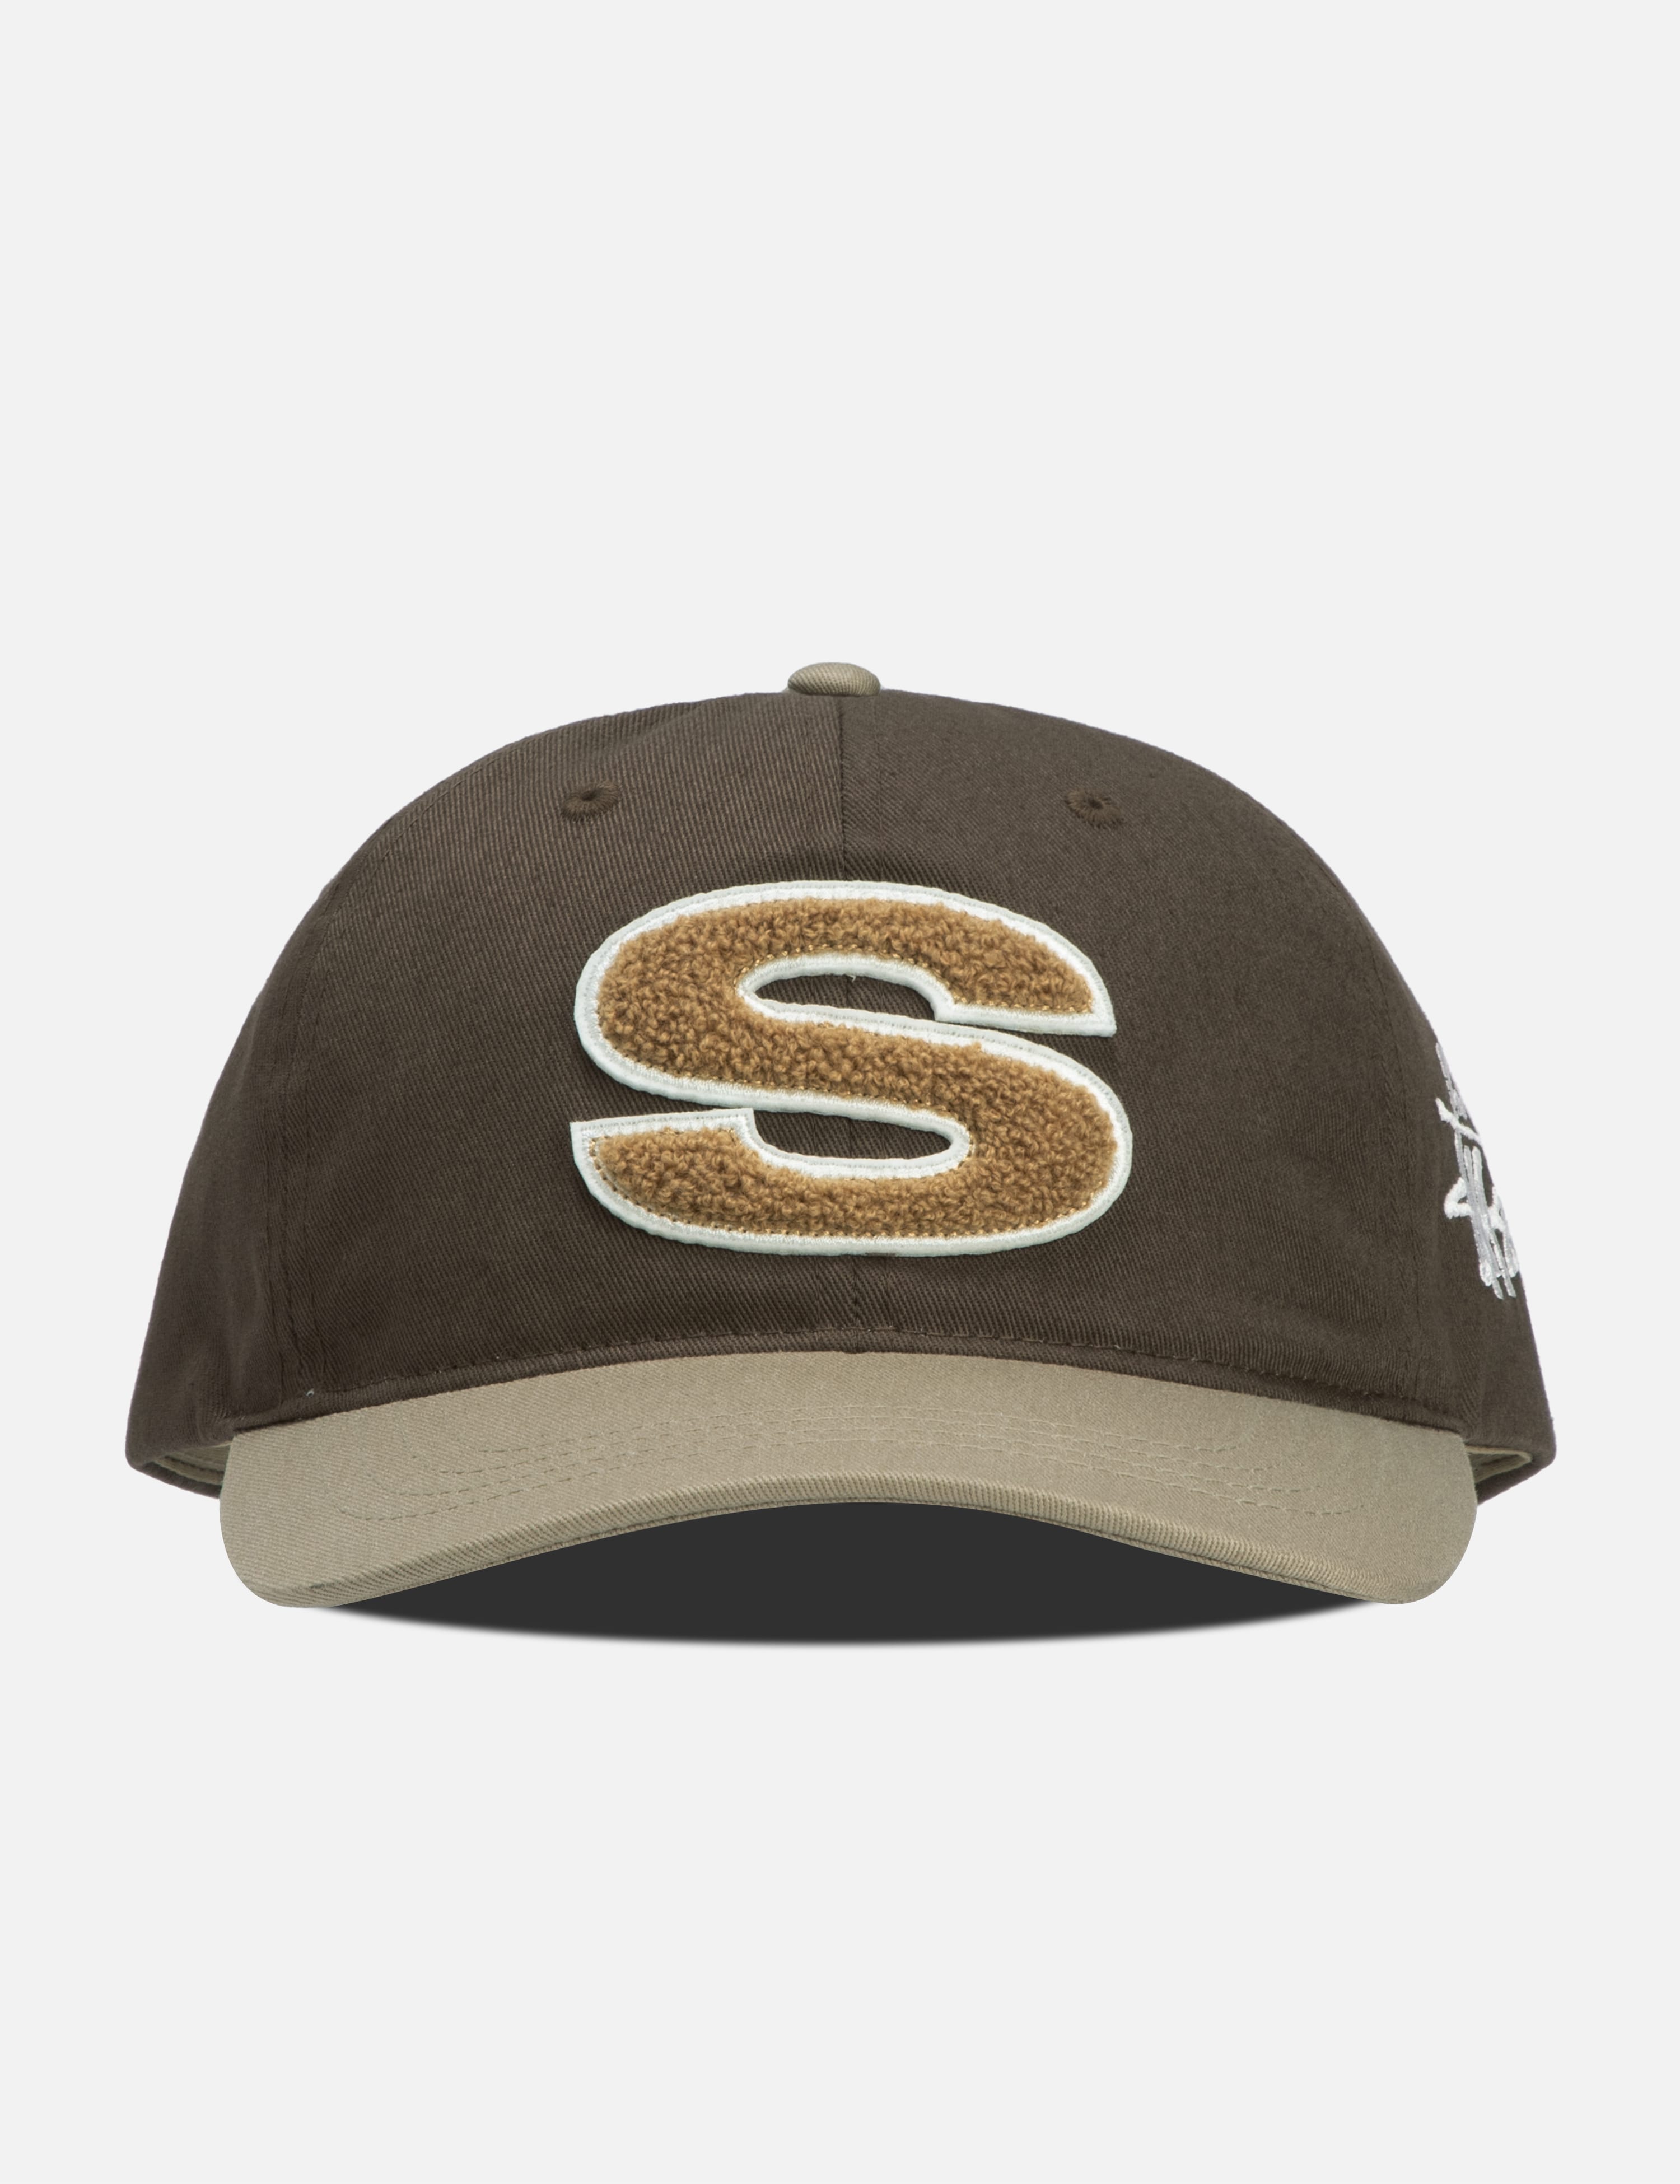 Stüssy - Chenille S Low Pro Cap | HBX - Globally Curated Fashion 